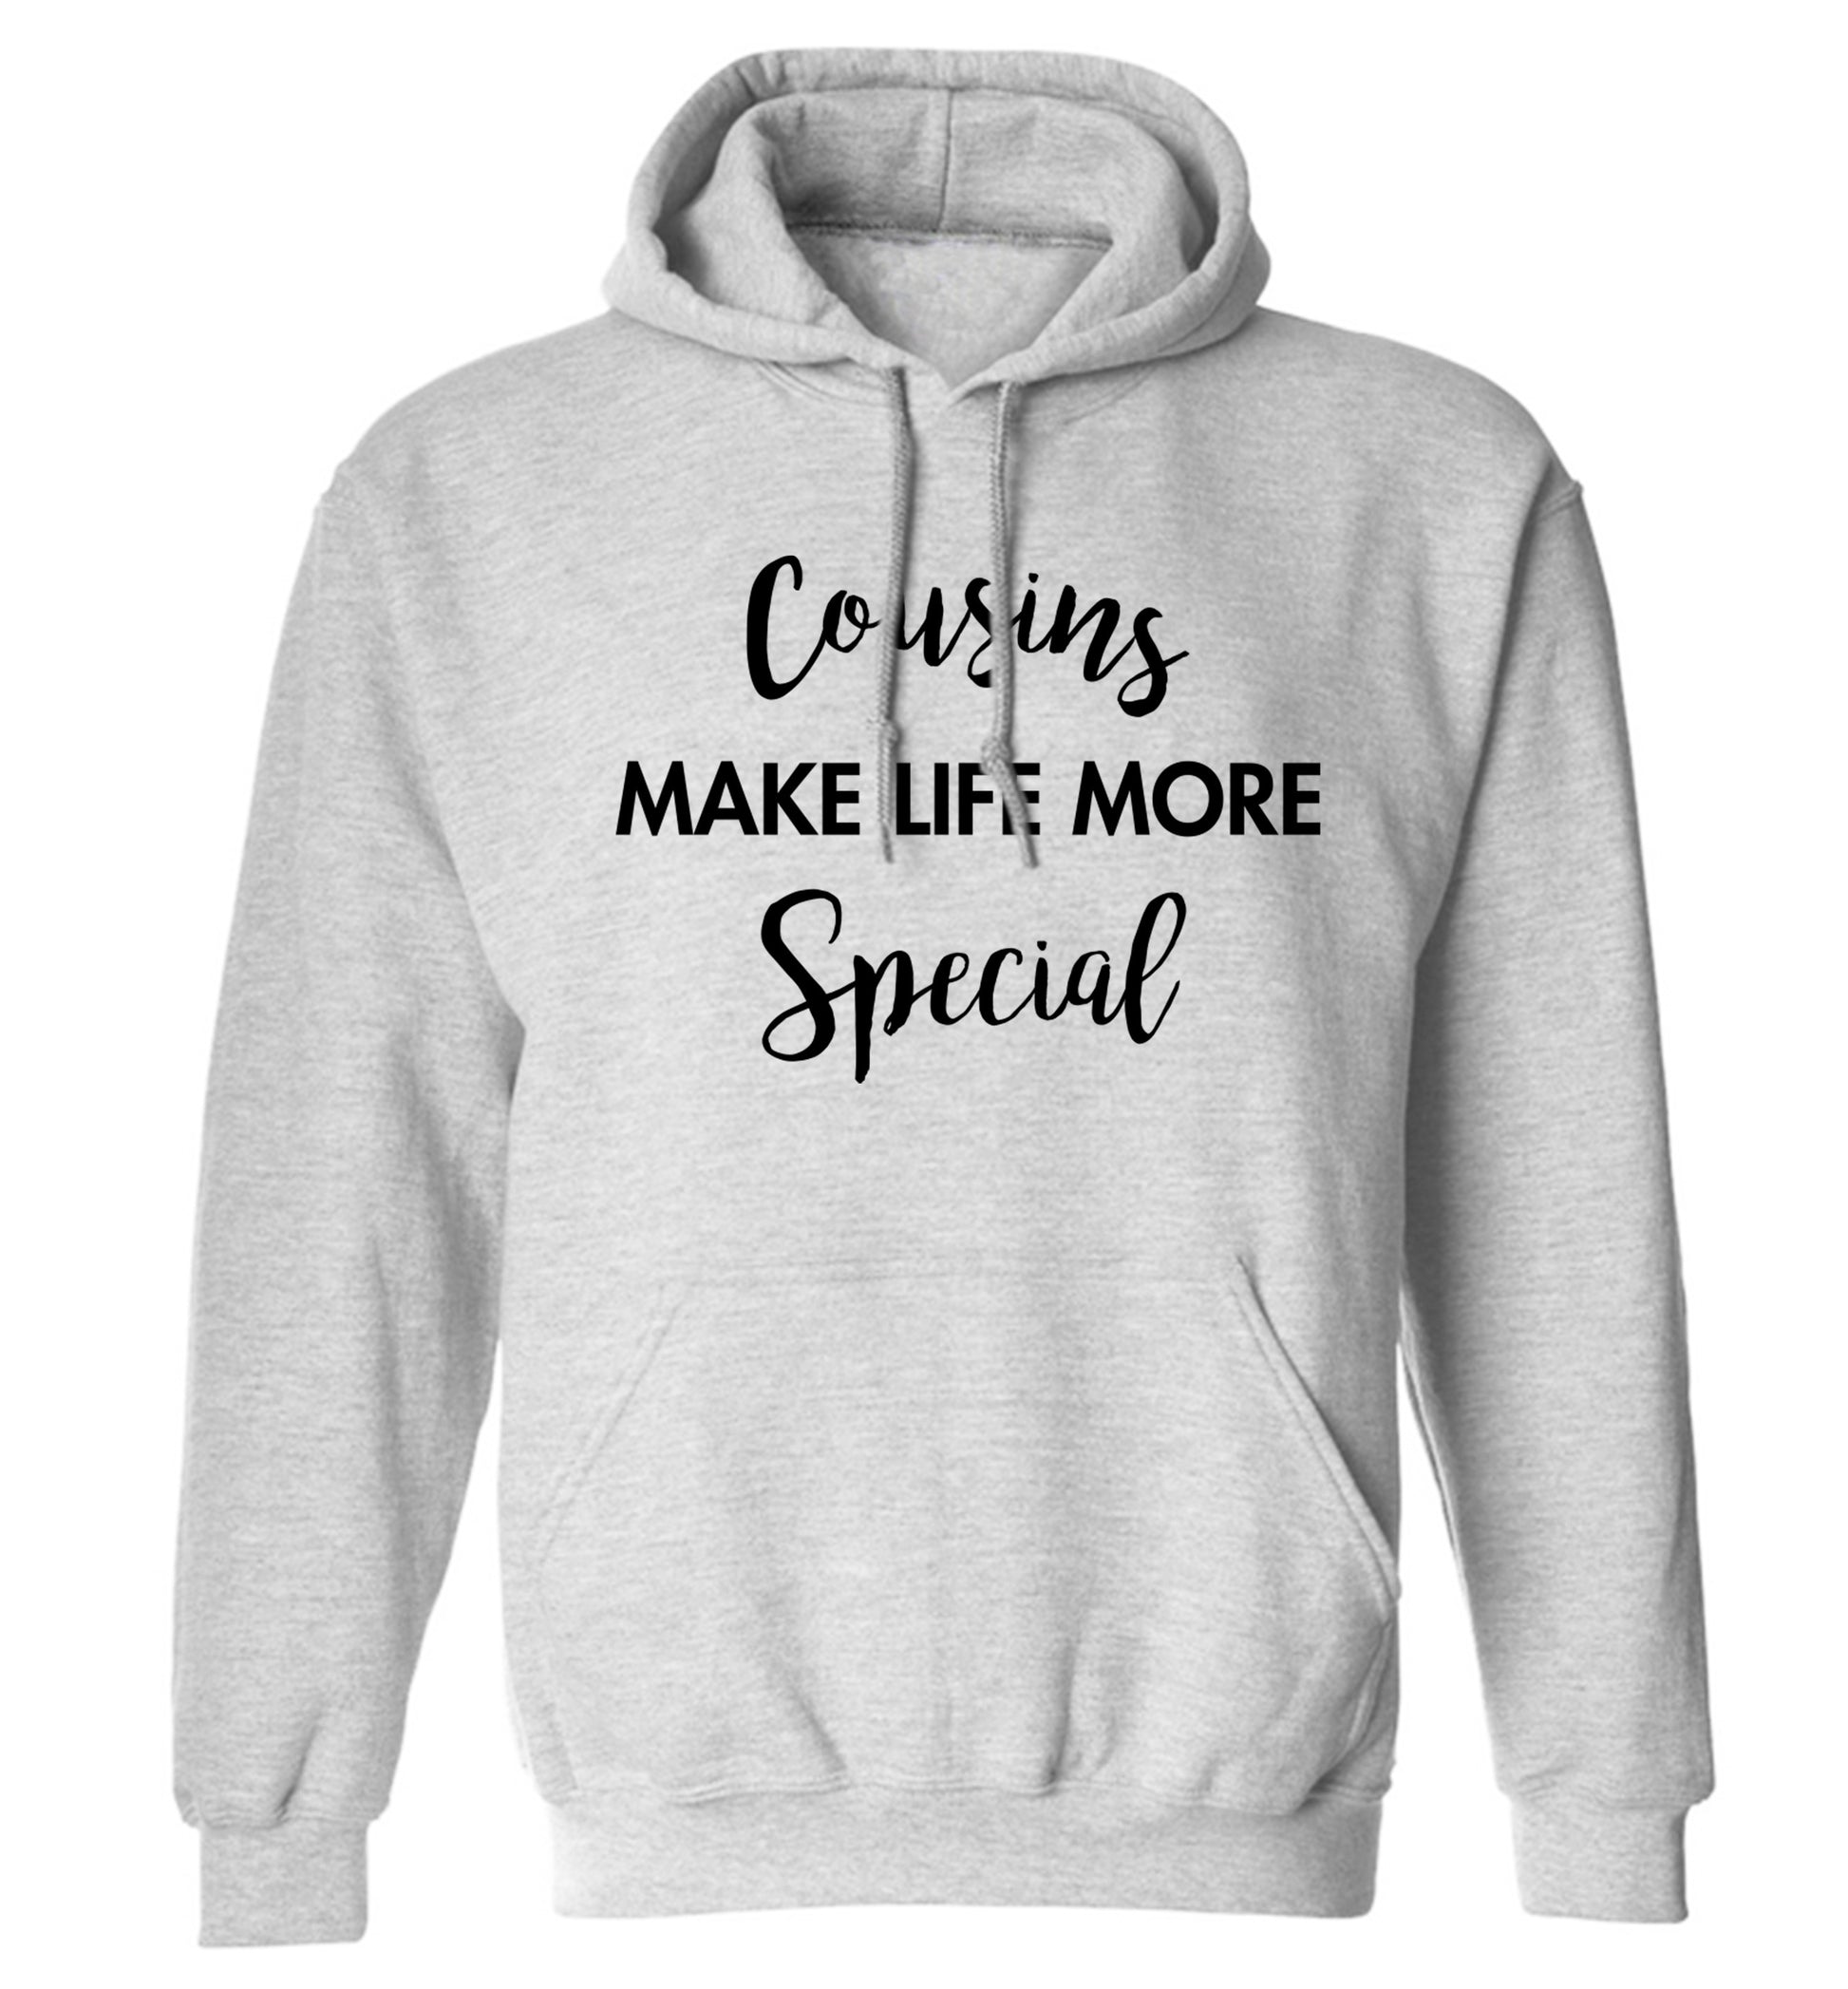 Cousins make life more special adults unisex grey hoodie 2XL